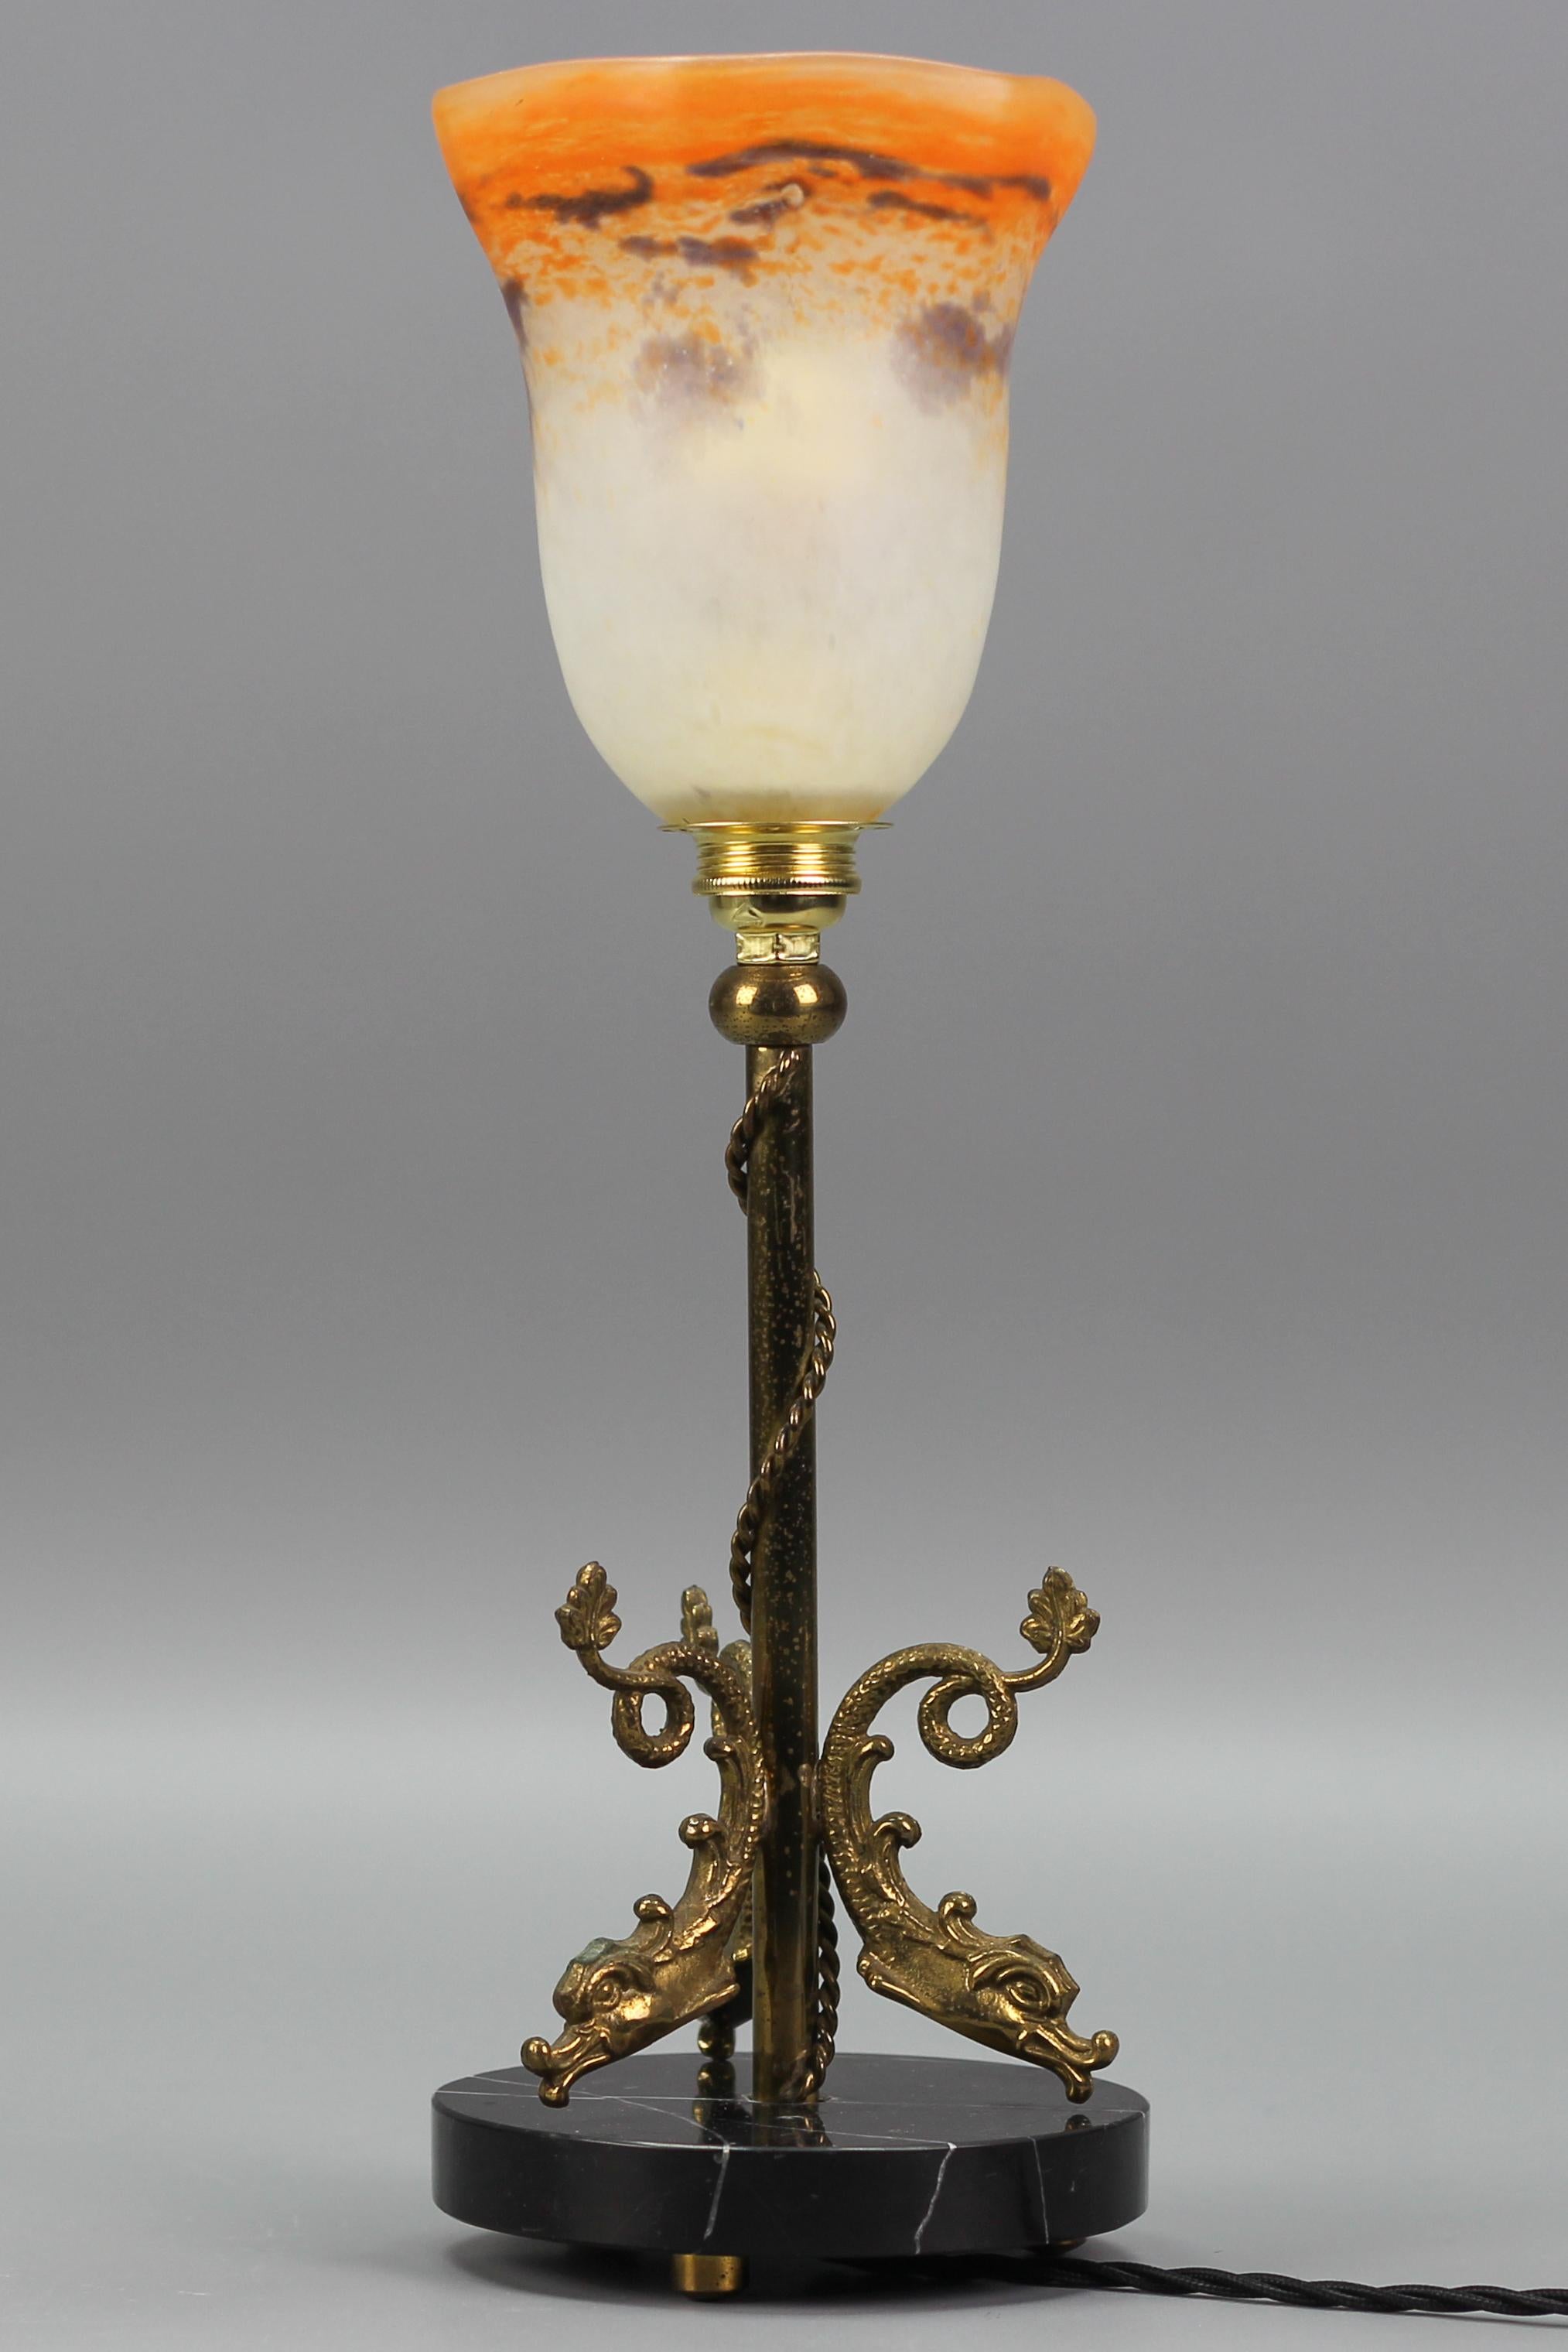 Mid-20th Century French Neoclassical Style Brass and Marble Table Lamp with Dolphins, 1950s For Sale